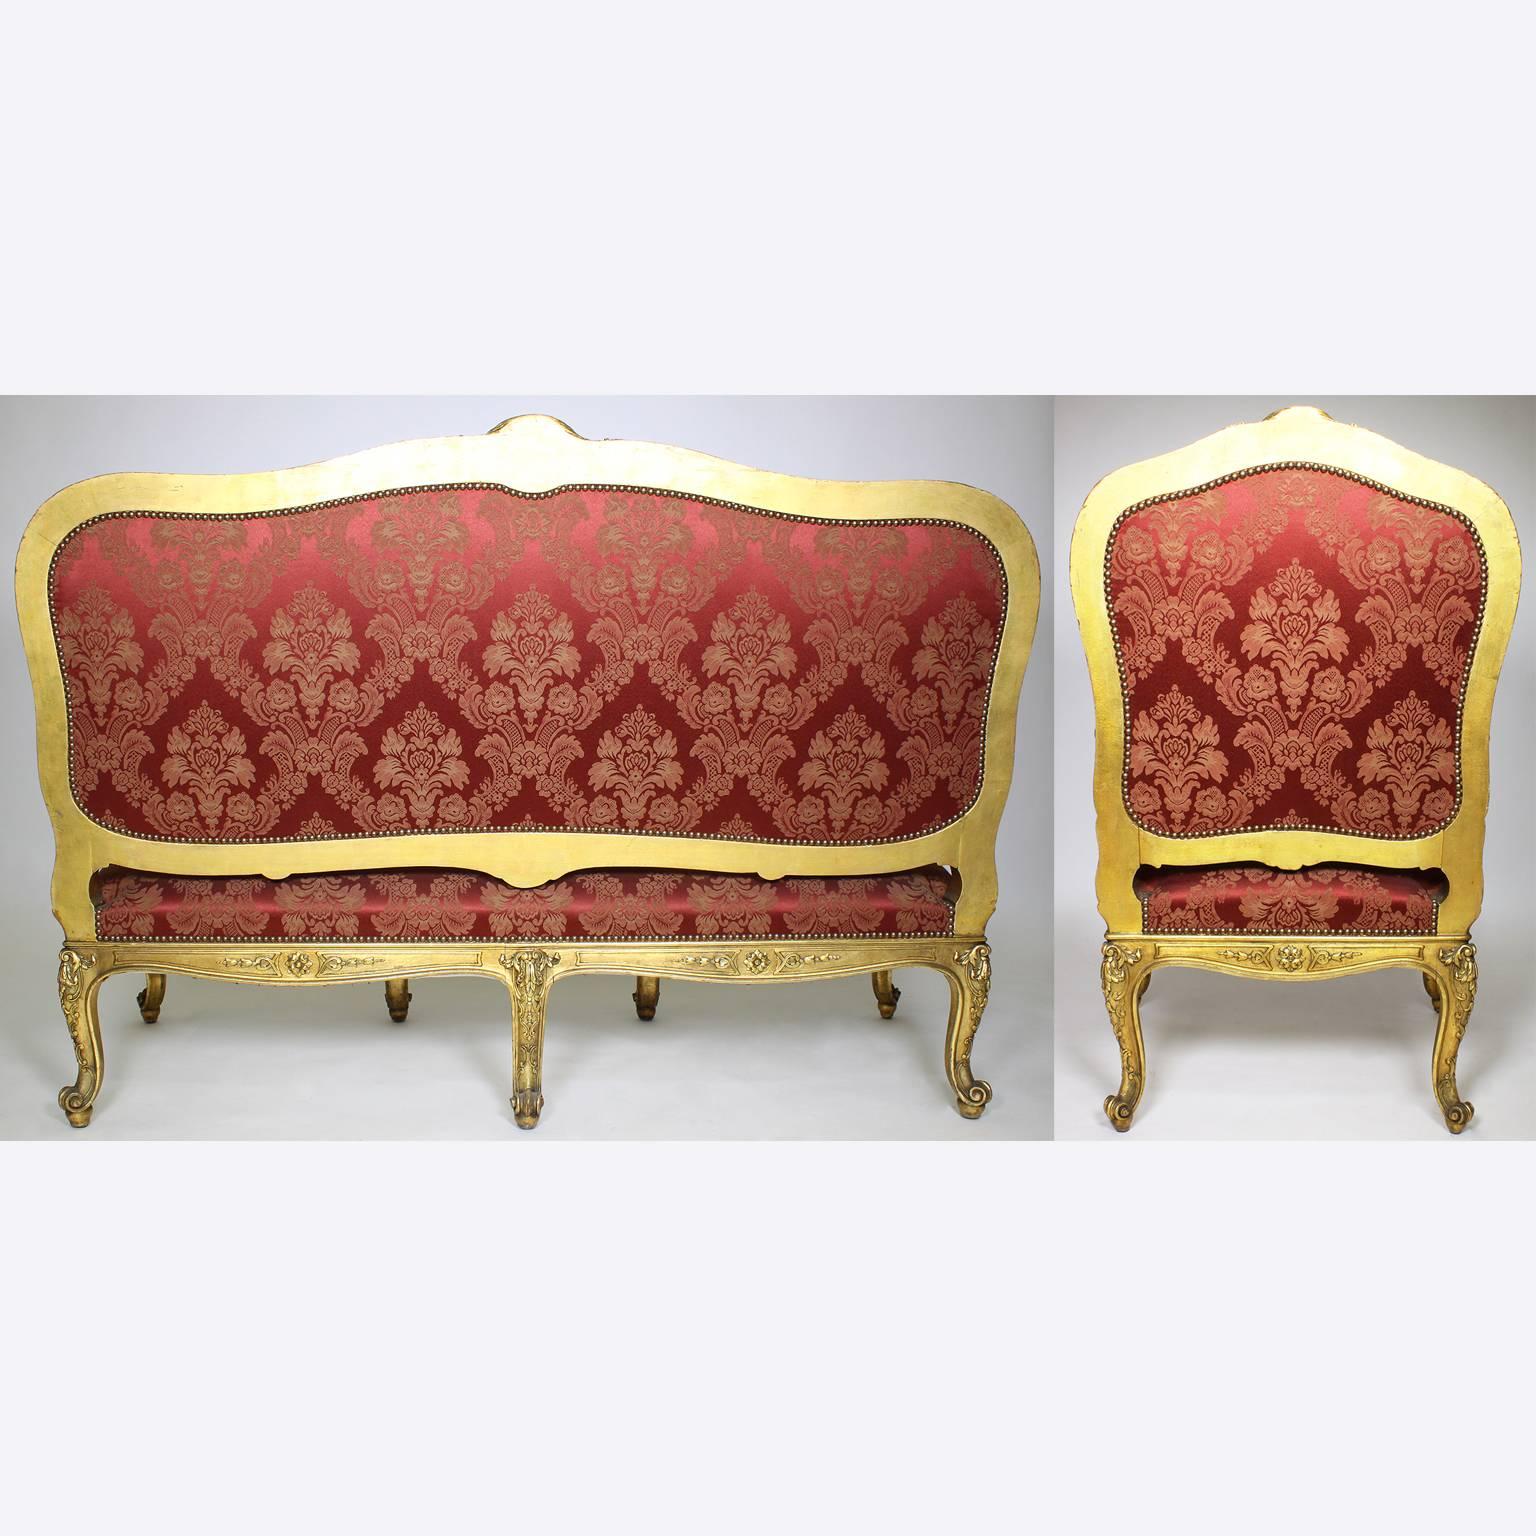 Palatial 19th Century Louis XV Style Giltwood Carved Three-Piece Salon Suite For Sale 4